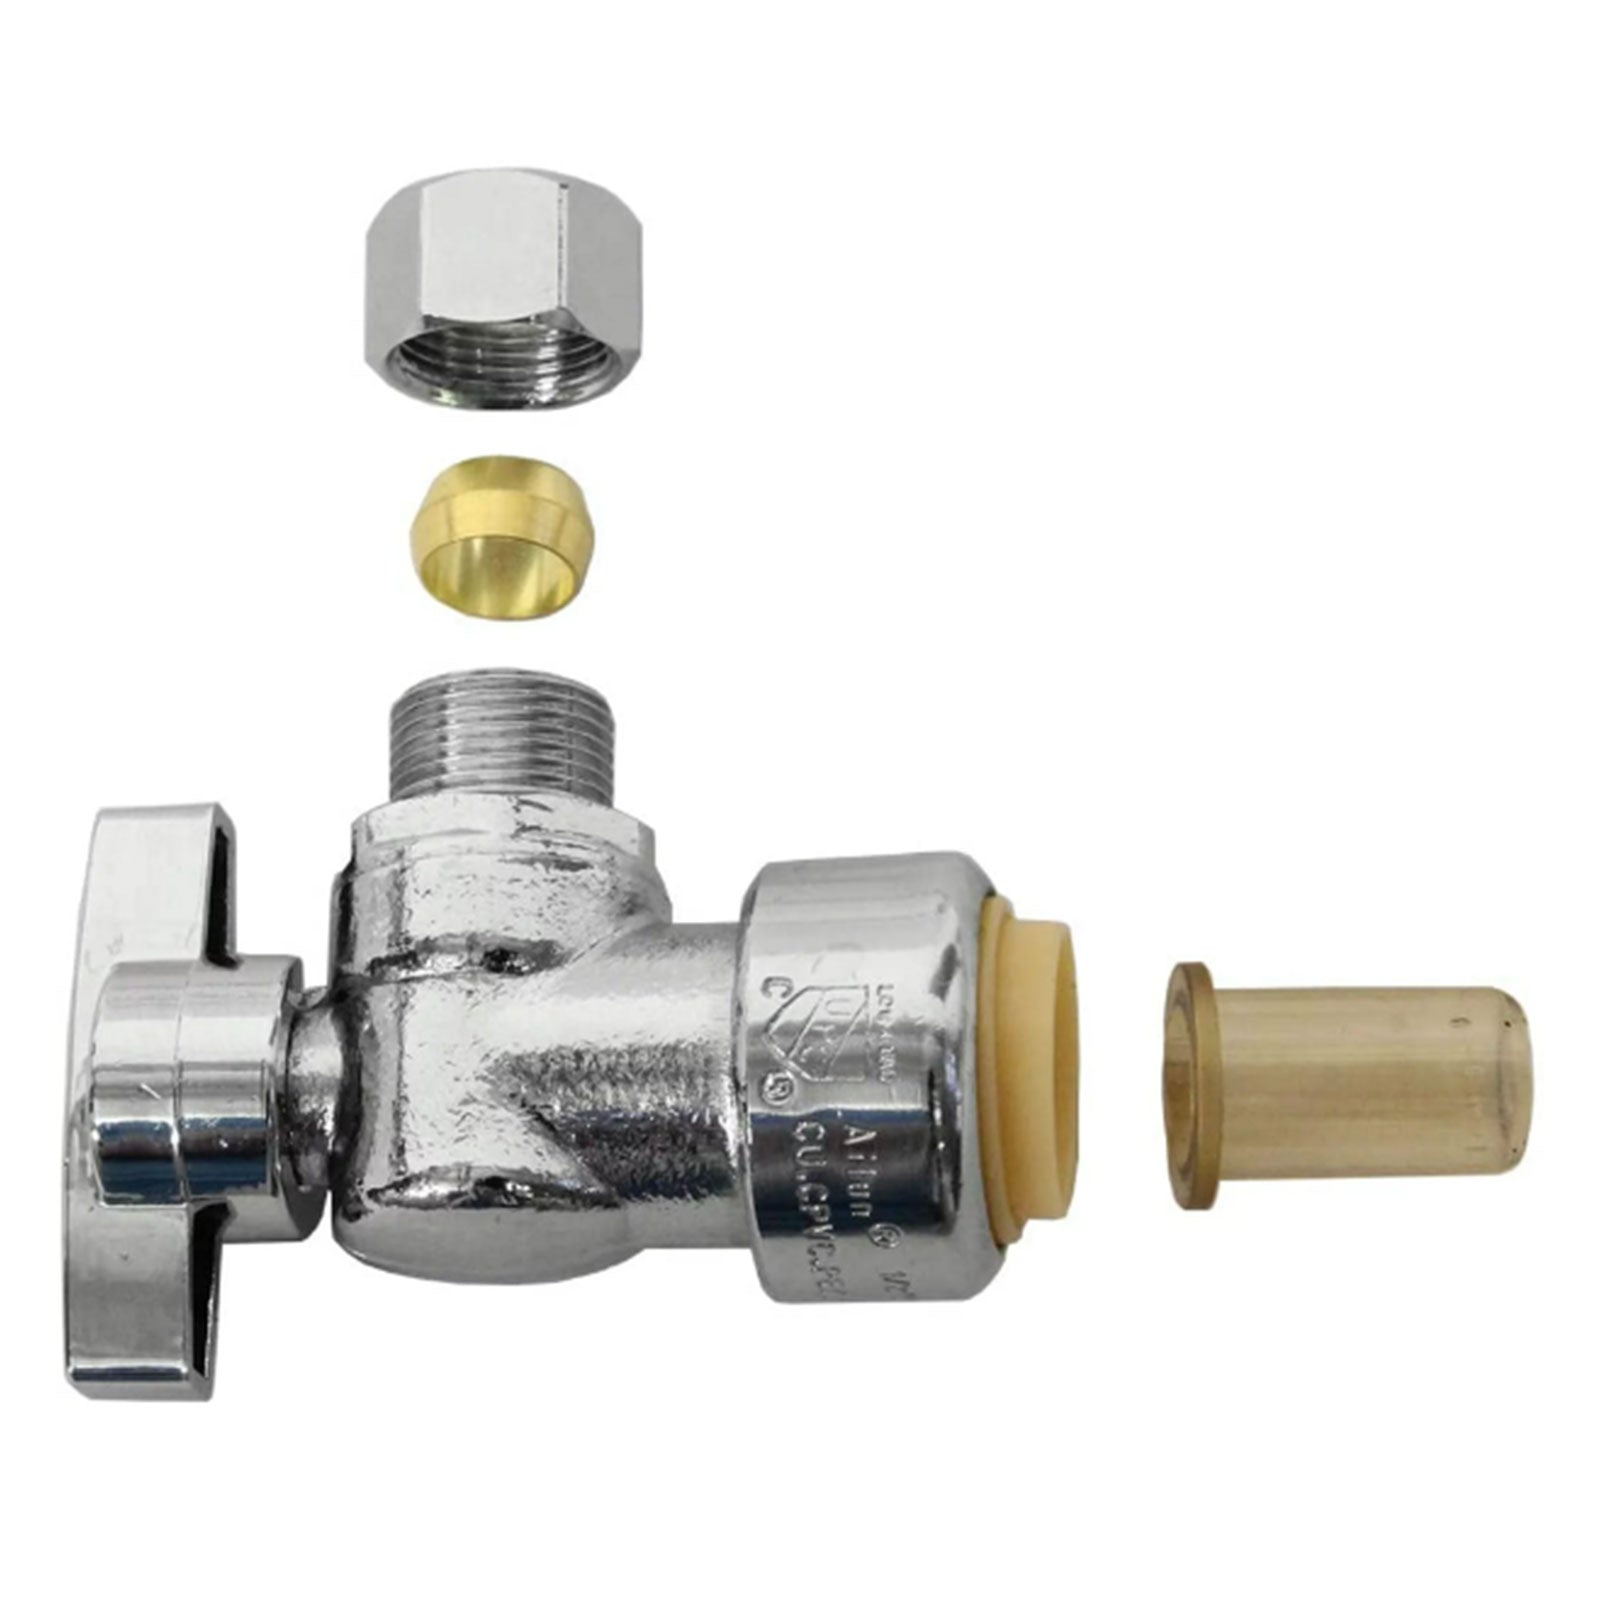 Push Fit Brass Angle Stop Shut Off Valve 1/2" Nom x 3/8" OD Comp, 1/4 Turn ON/Off for Bathroom Fixtures - Faucet, Toilet Supply Shut-Off Lead Free LF